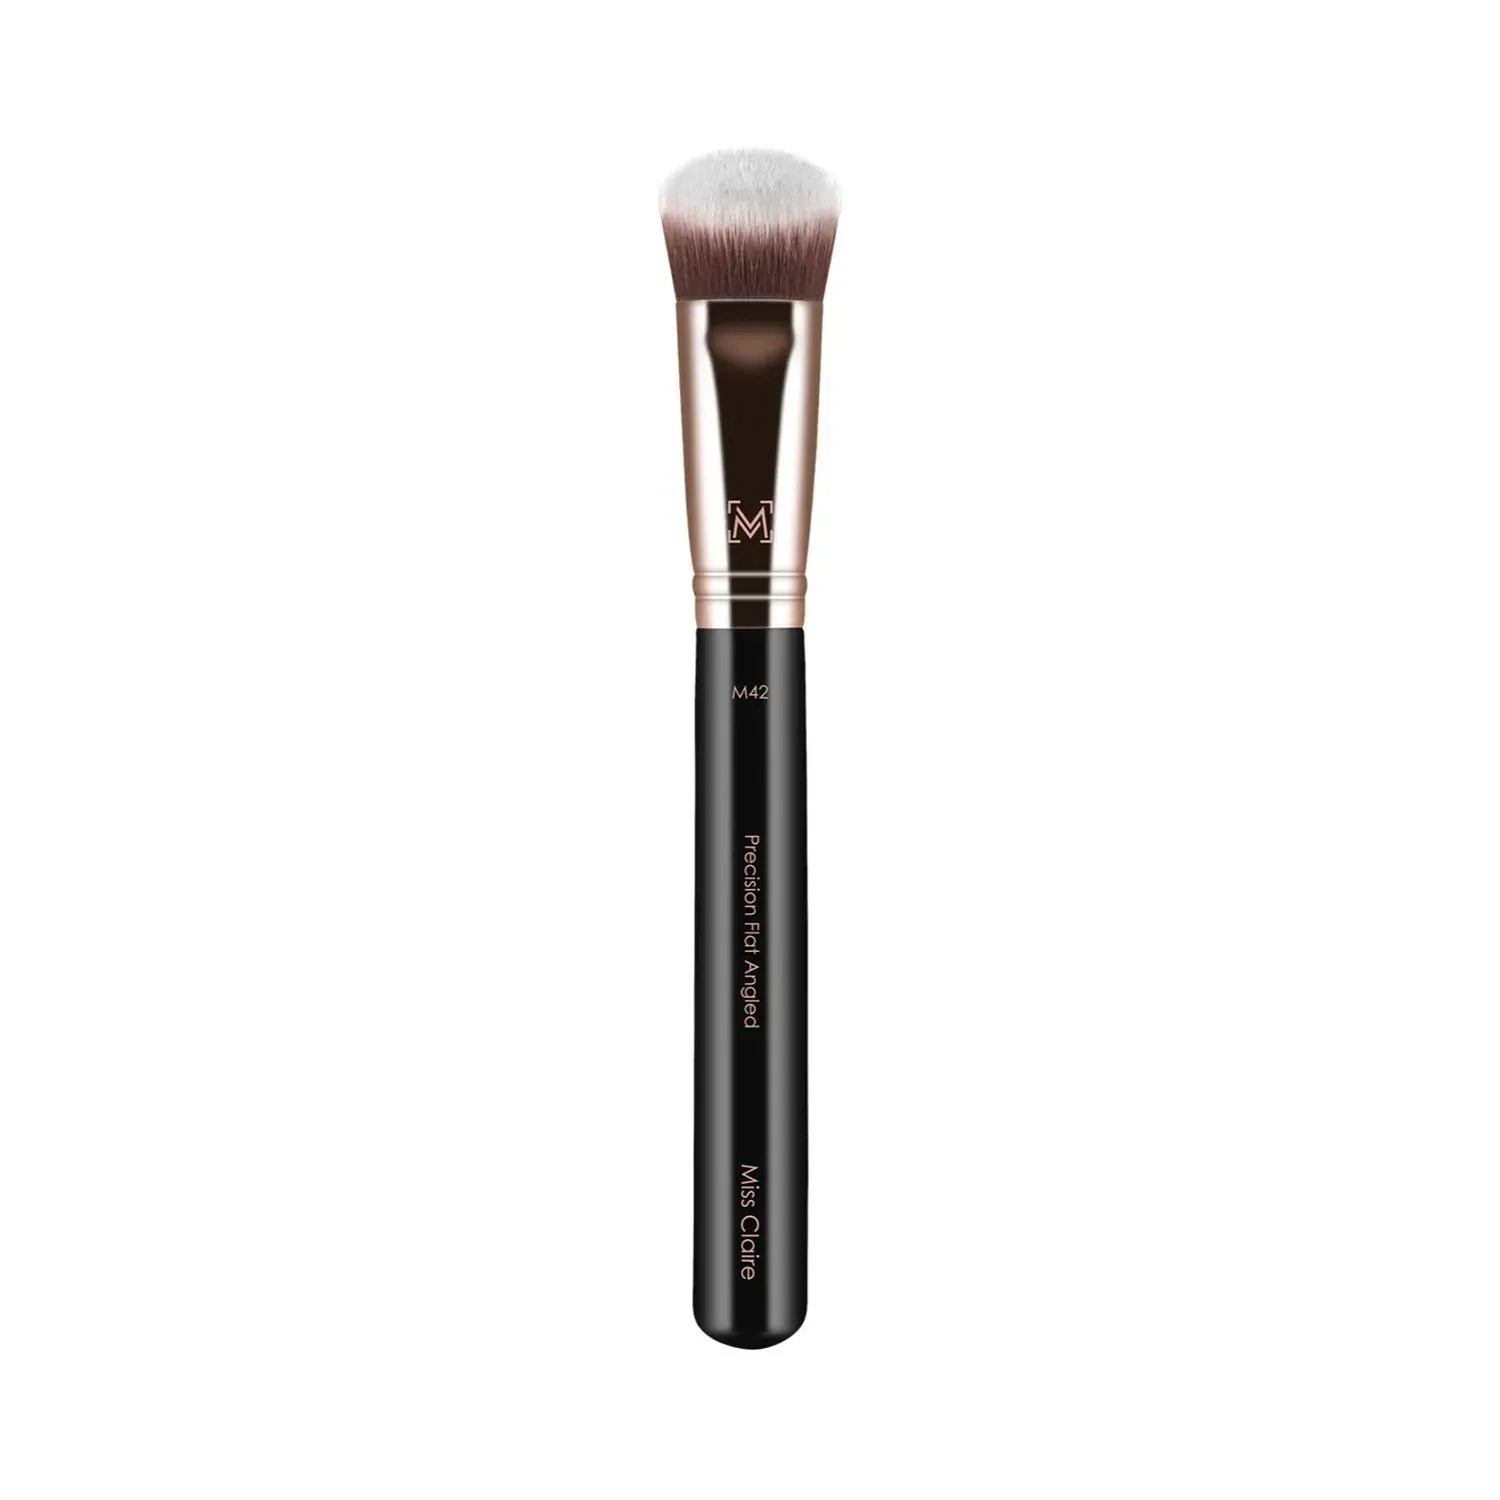 Miss Claire | Miss Claire M42 Precision Flat Angled Brush - Rose Gold